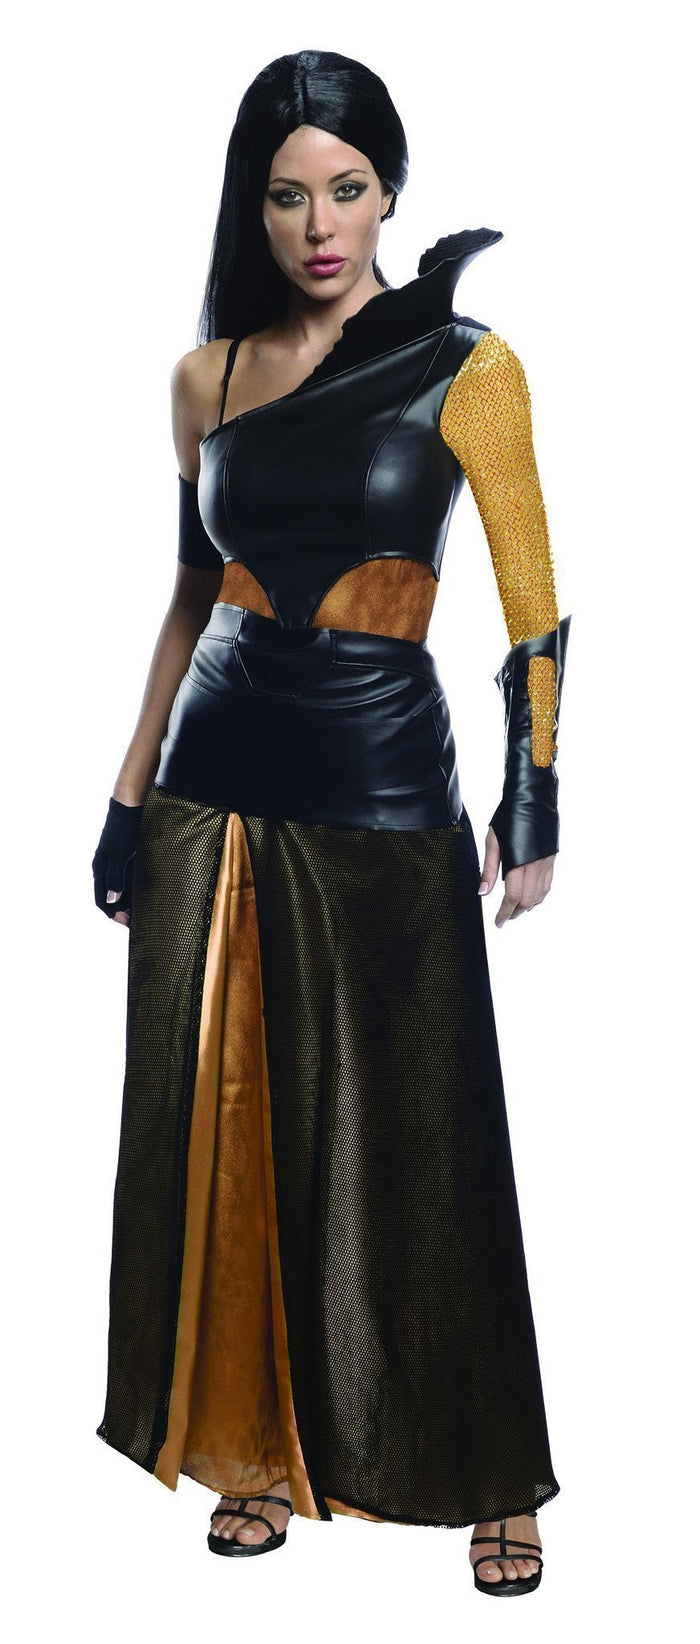 Artemesia Fire Battle Costume for Adults - Warner Bros 300 Movie